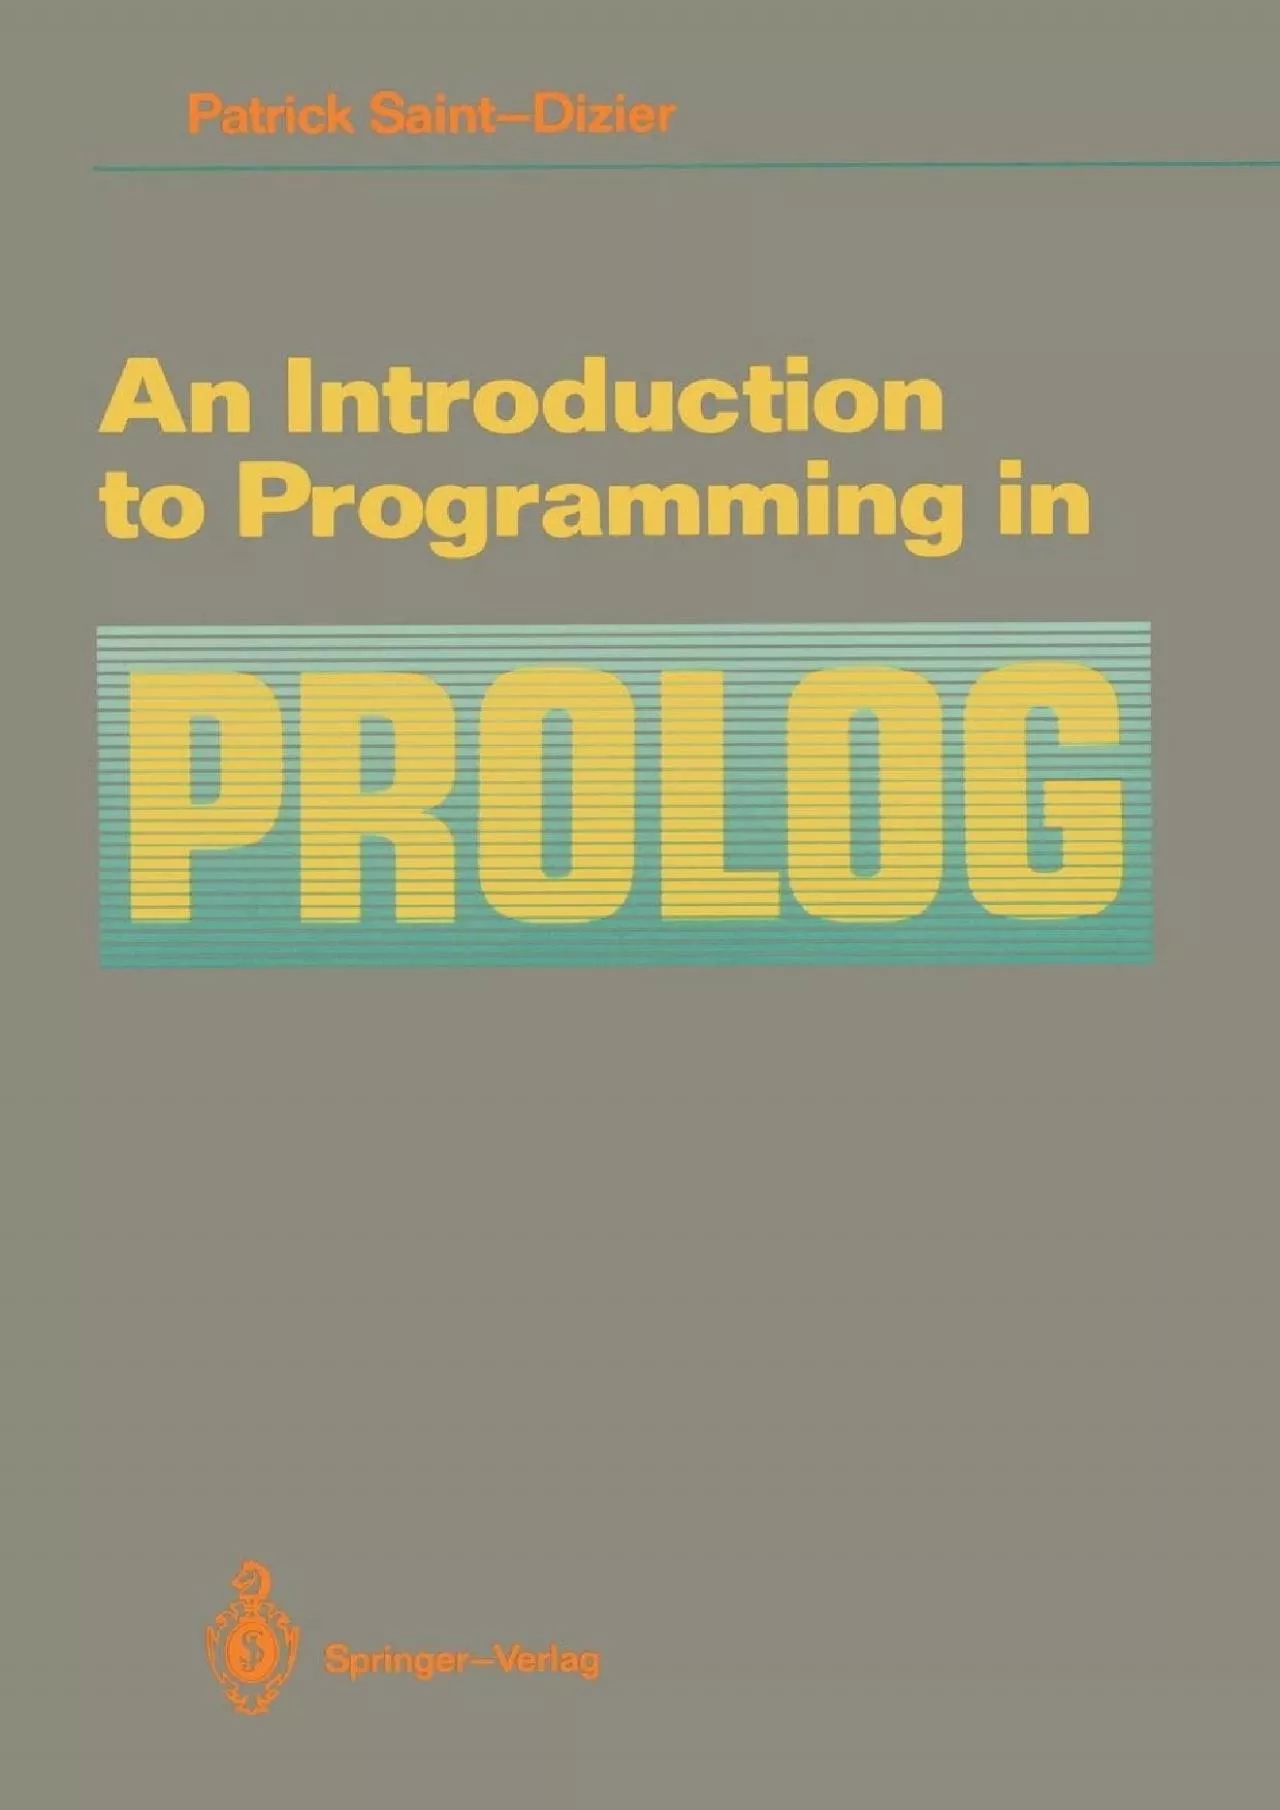 [READ]-An Introduction to Programming in Prolog